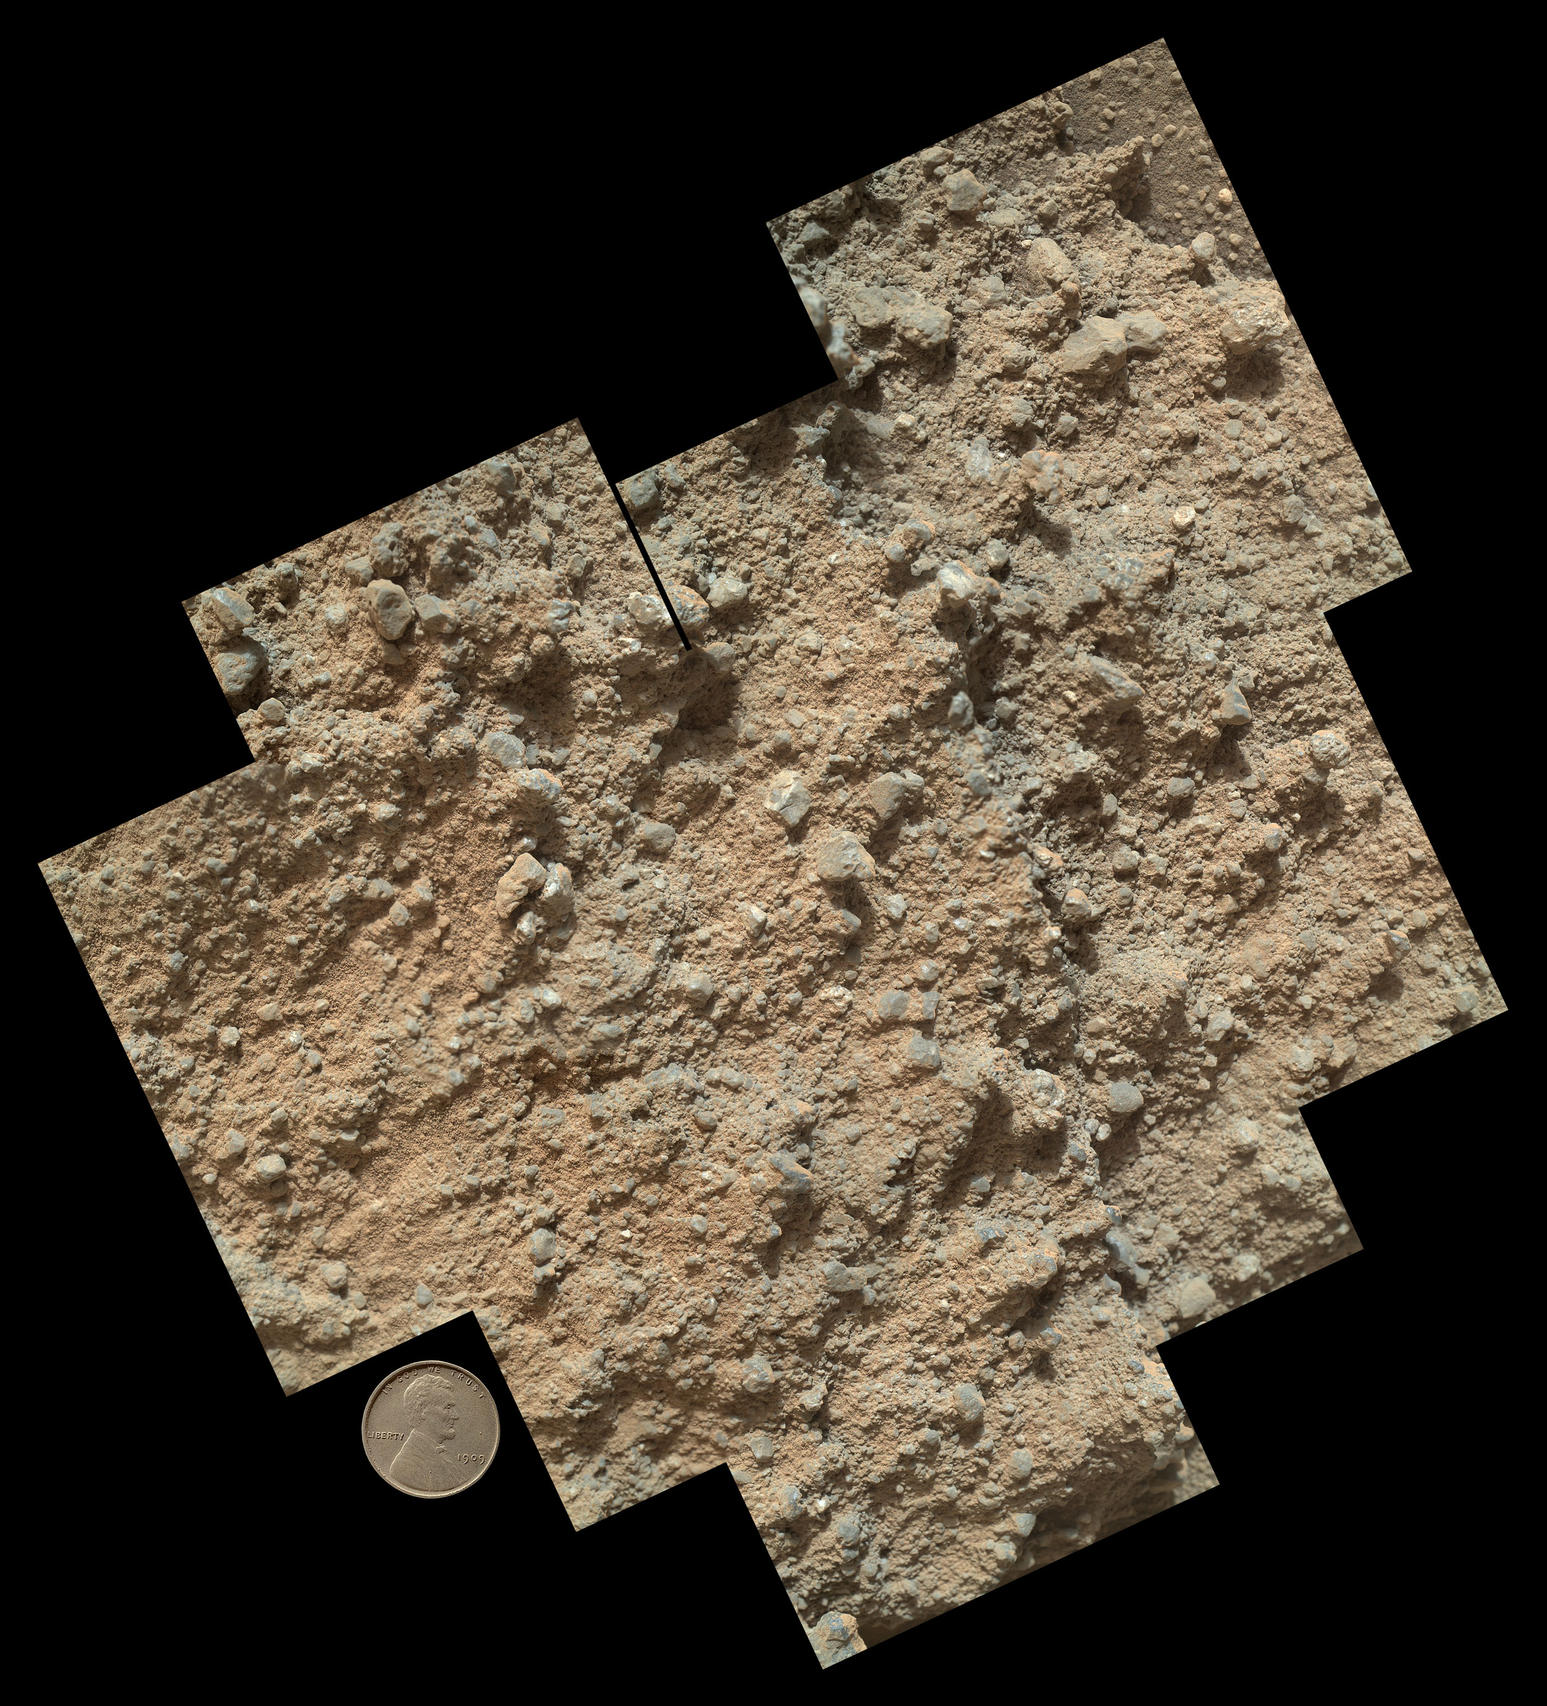 This mosaic of nine images, taken by the Mars Hand Lens Imager (MAHLI) camera on NASA's Mars rover Curiosity, shows detailed texture in a conglomerate rock bearing small pebbles and sand-size particles.